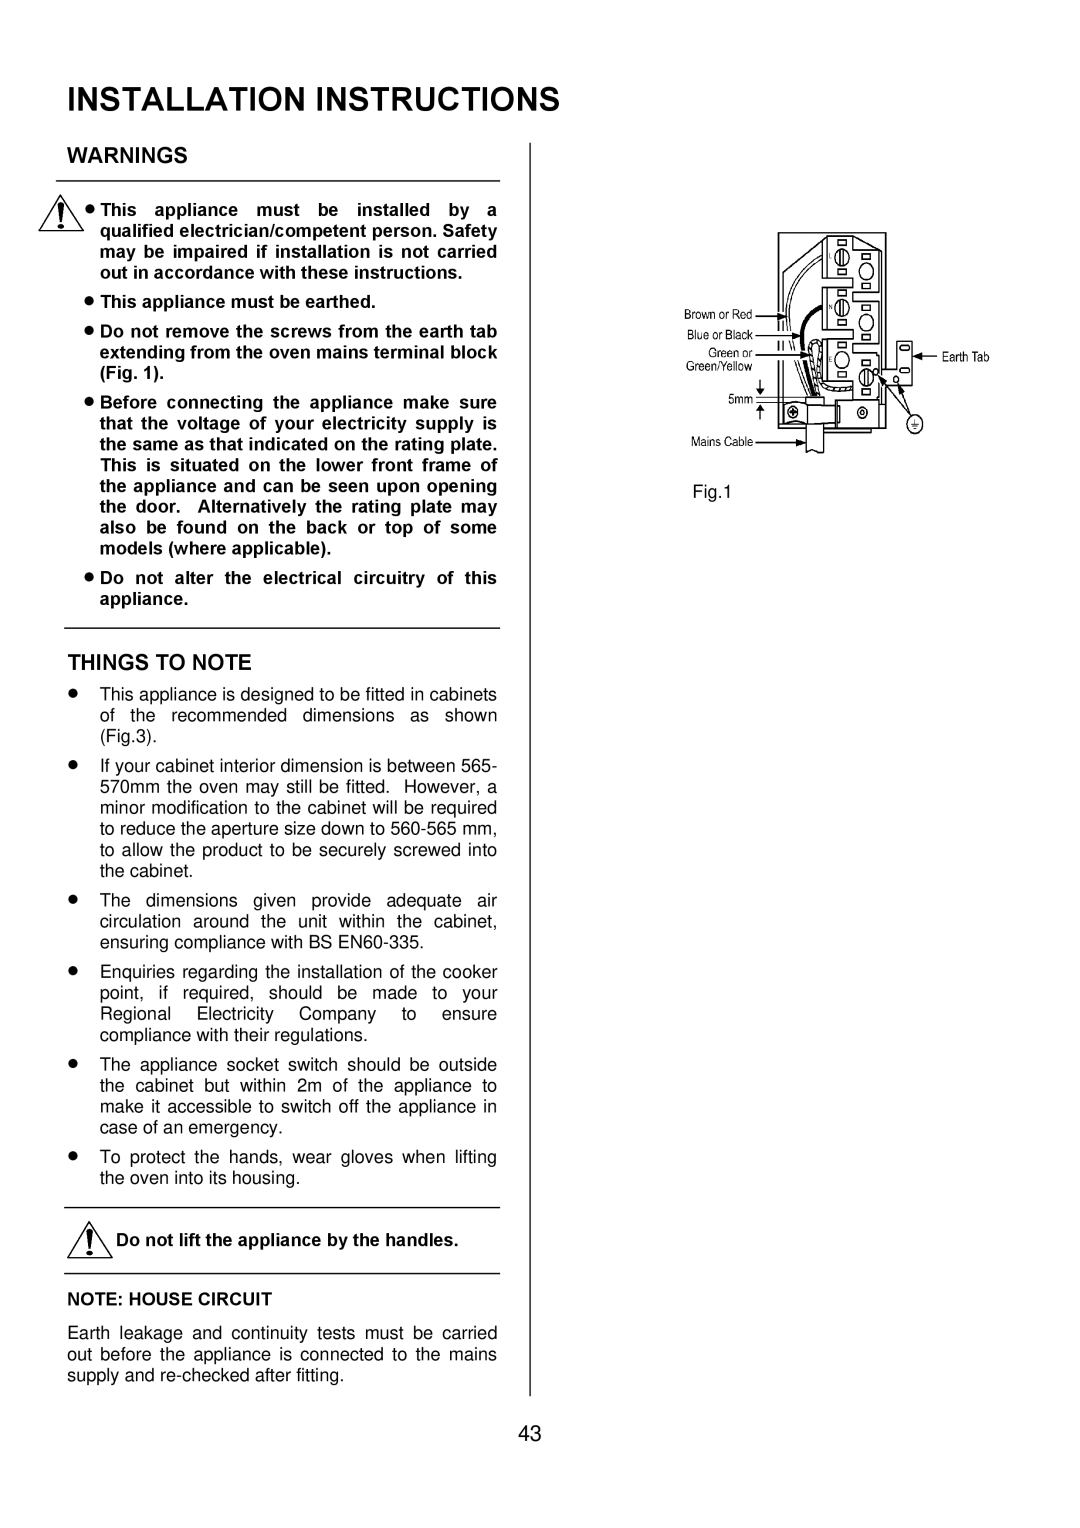 Electrolux D8800-4 operating instructions Installation Instructions, Do not lift the appliance by the handles 